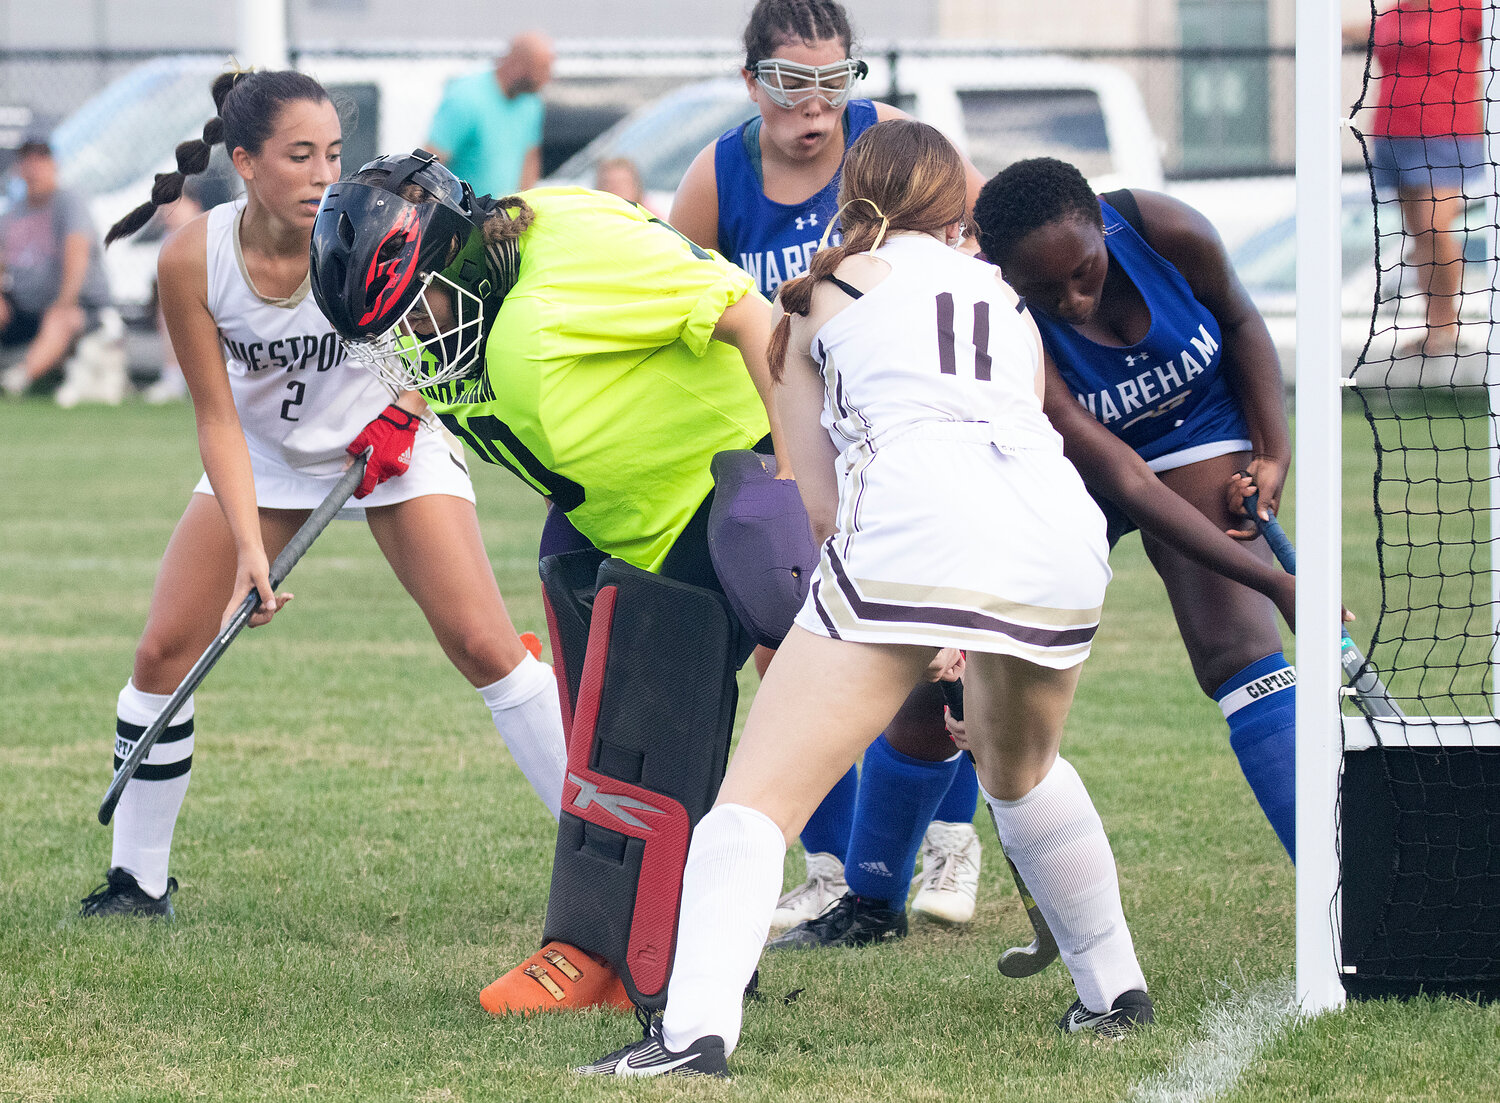 Avery Avila (left) and Cailynn White attempt to stuff the ball into the goal.